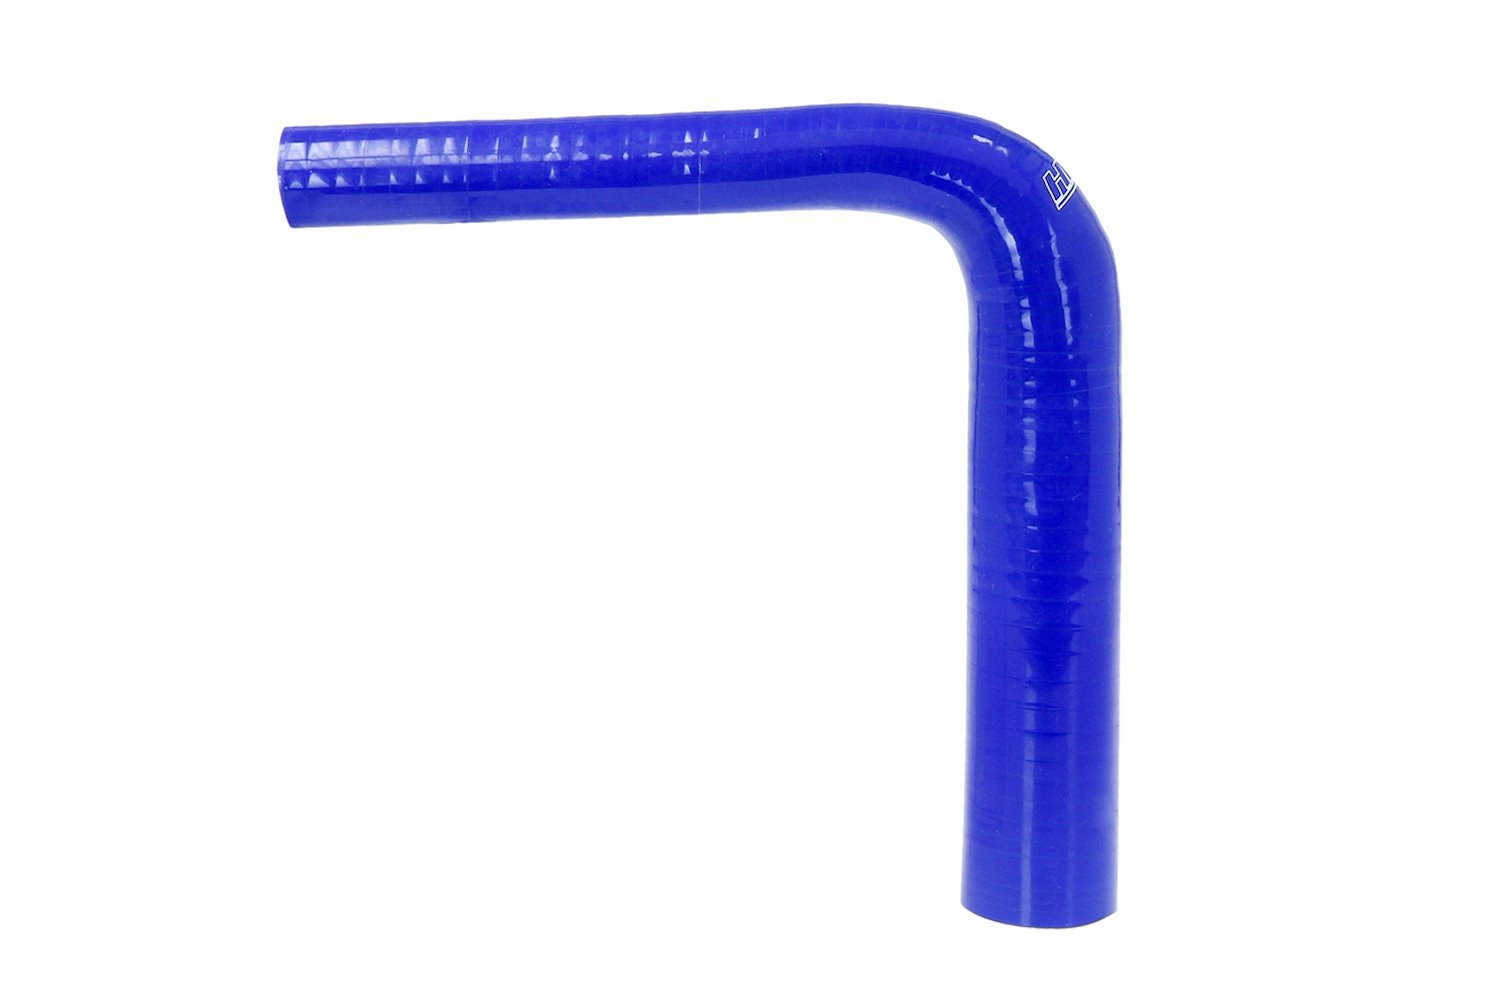 HTSER90-062-087-BLUE Silicone 90-Degree Elbow Hose, High-Temp 4-Ply Reinforced, 5/8 in. - 7/8 in. ID, Blue